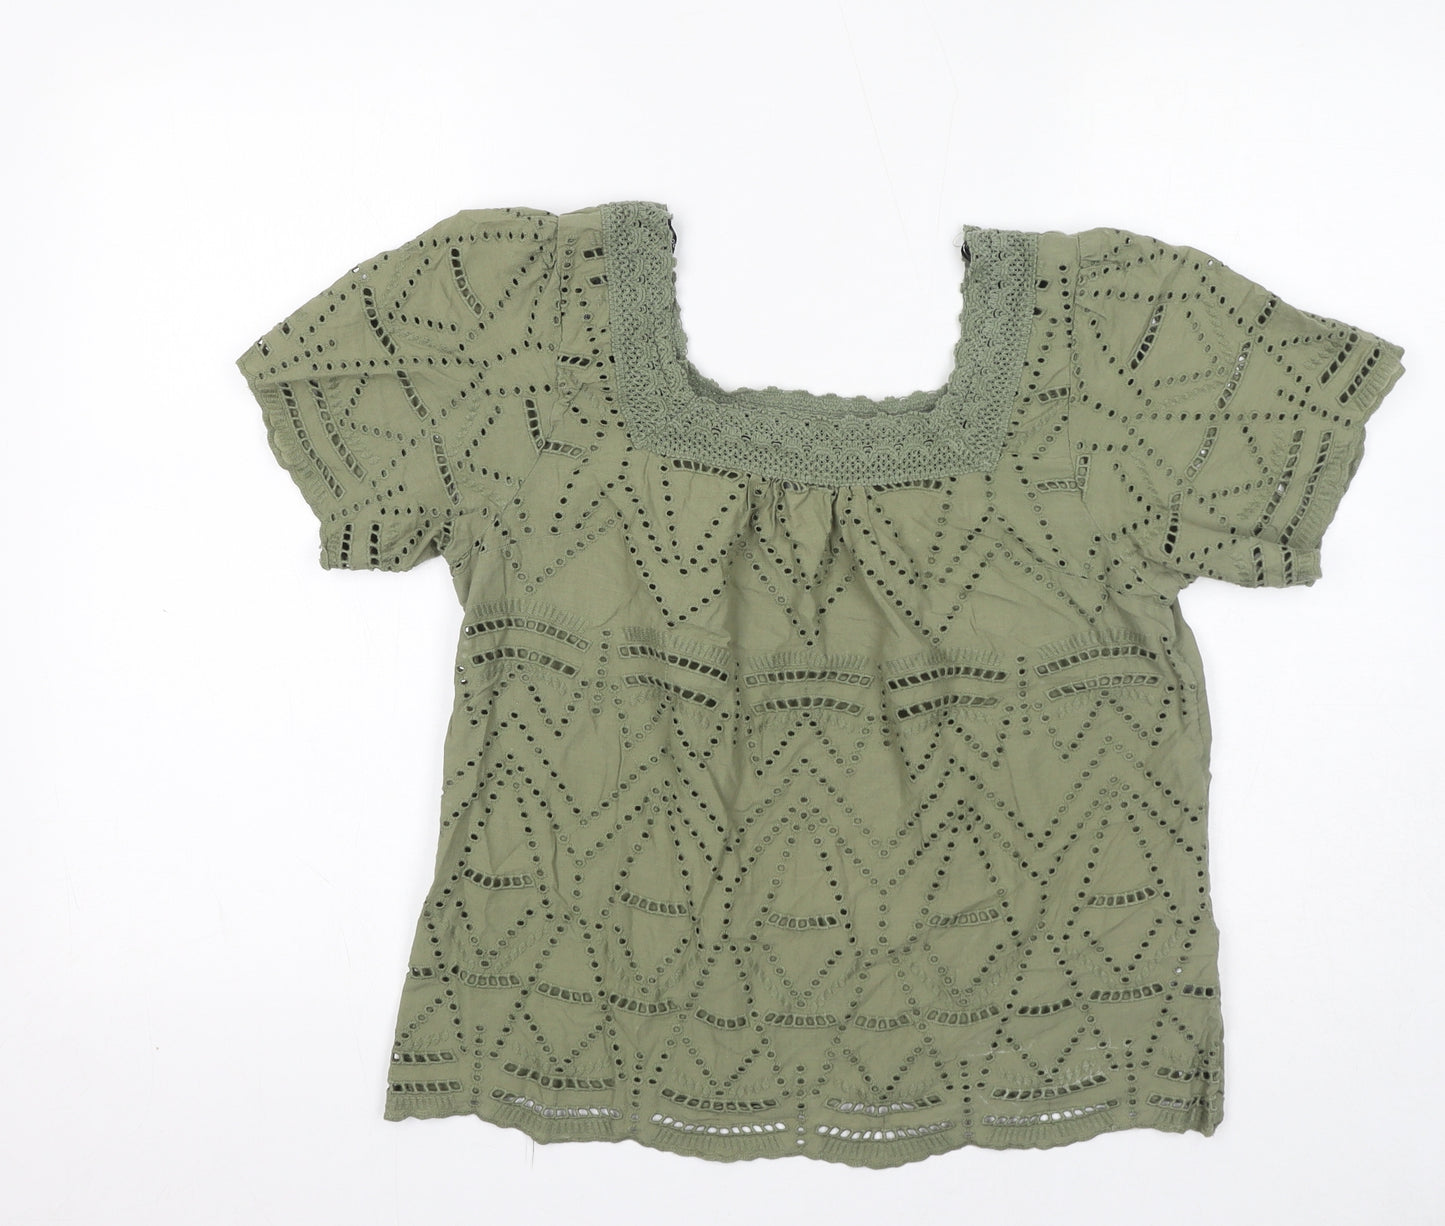 Dorothy Perkins Womens Green 100% Cotton Basic Blouse Size 12 Square Neck - Broderie Anglaise